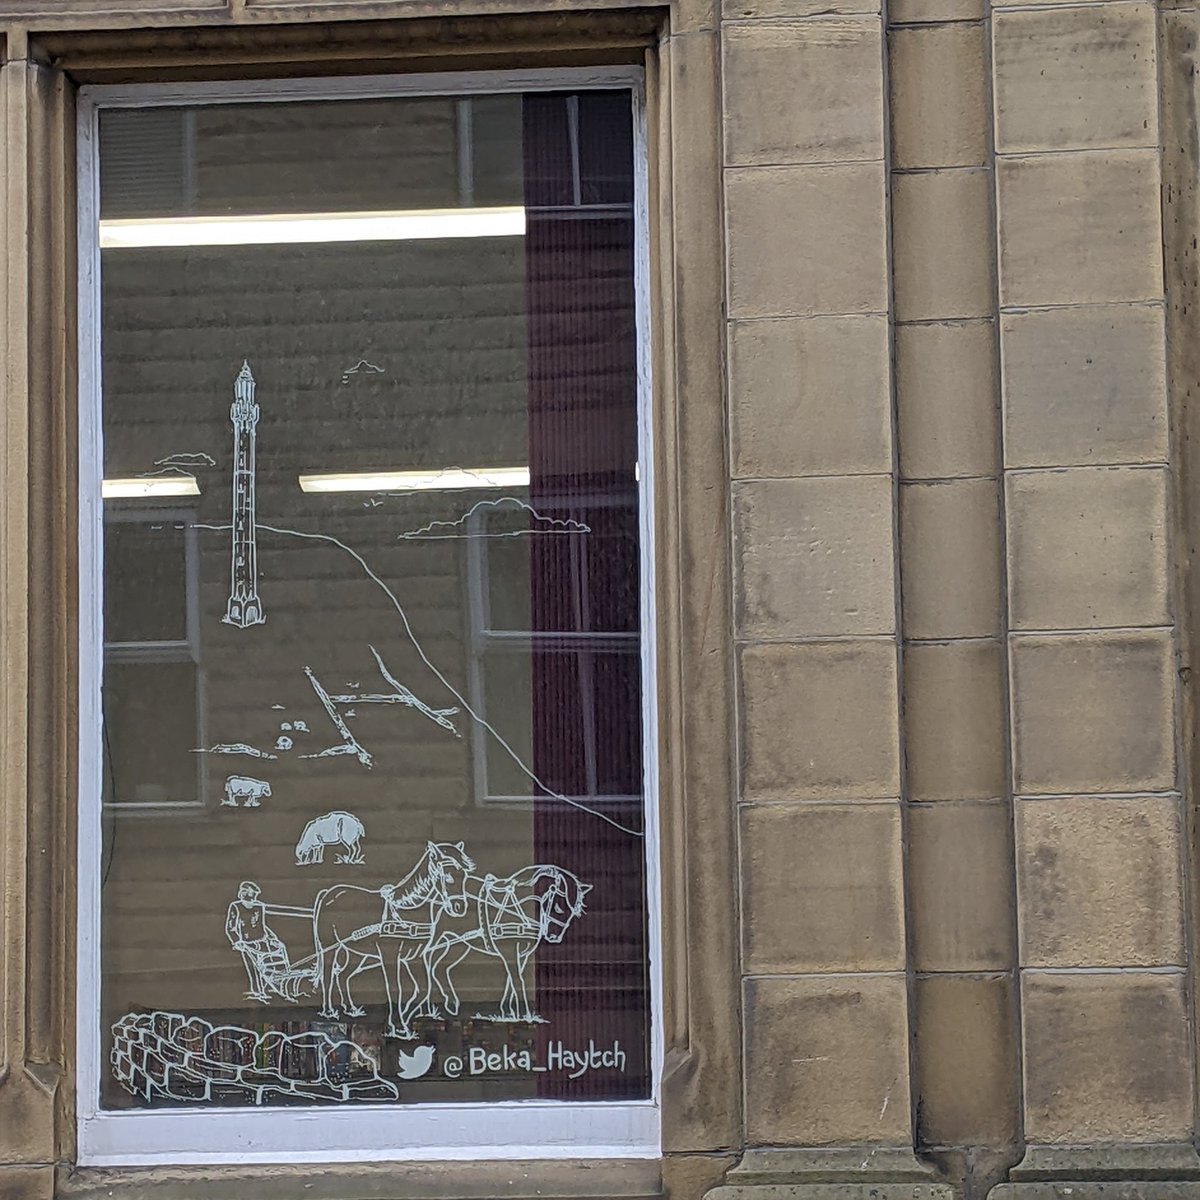 My first day of illustrating the windows at Sowerby Bridge Library... Past, present and future of the town across 6 windows as part of a commission for the brilliant @sbhshaz. I'm here tomorrow all day too - come and say hello! @CMBClibraries @SBfireandwater #SBJubilee